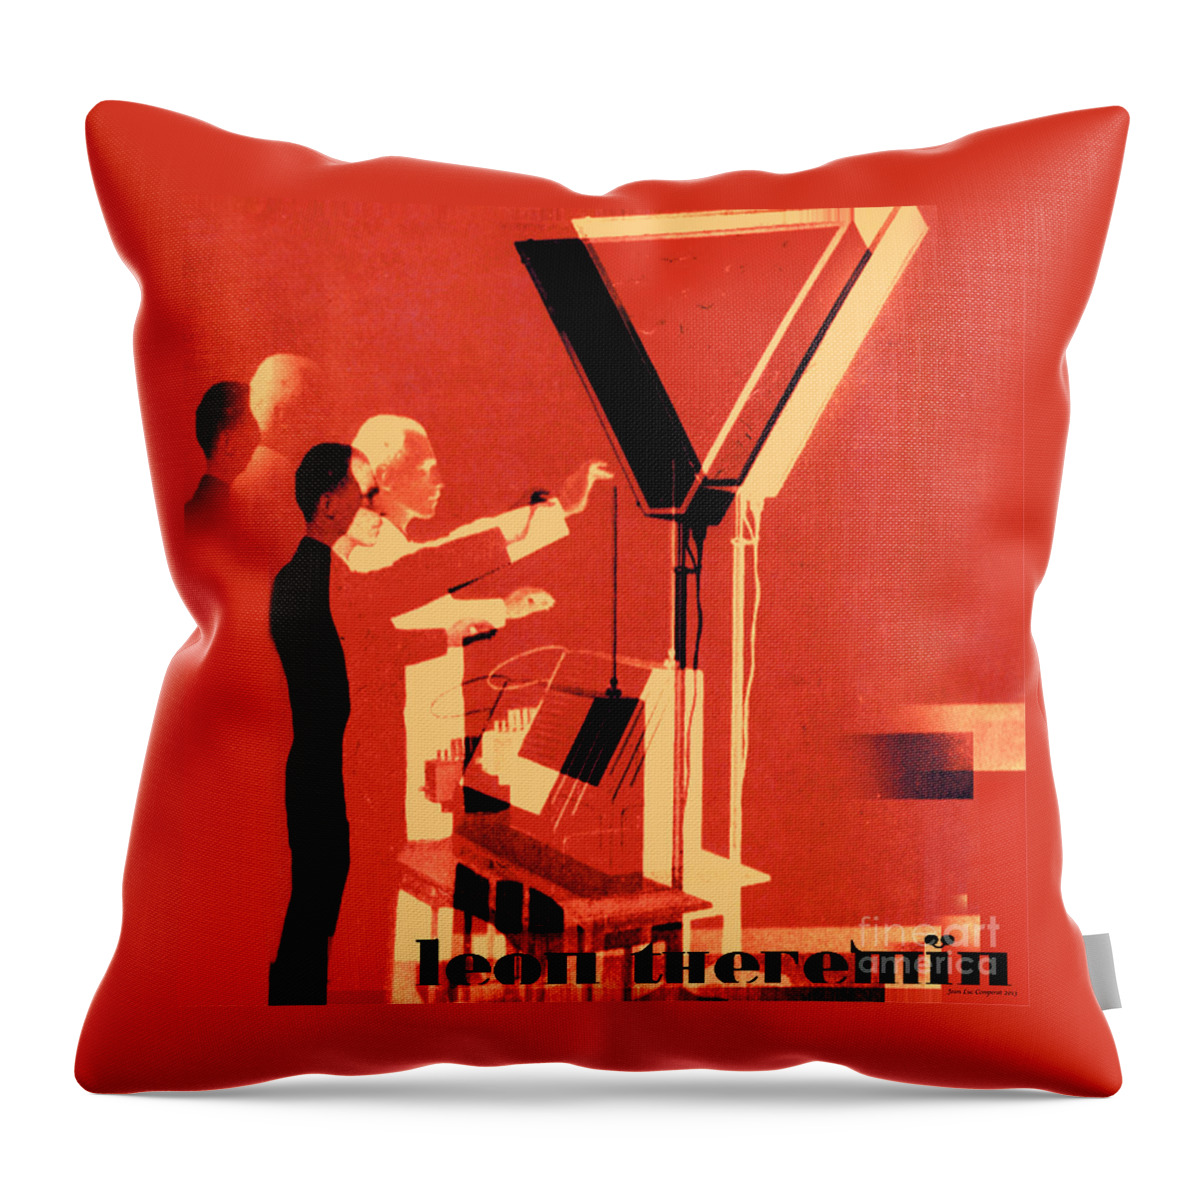 Theremin Throw Pillow featuring the digital art Leon Theremin by Jean luc Comperat